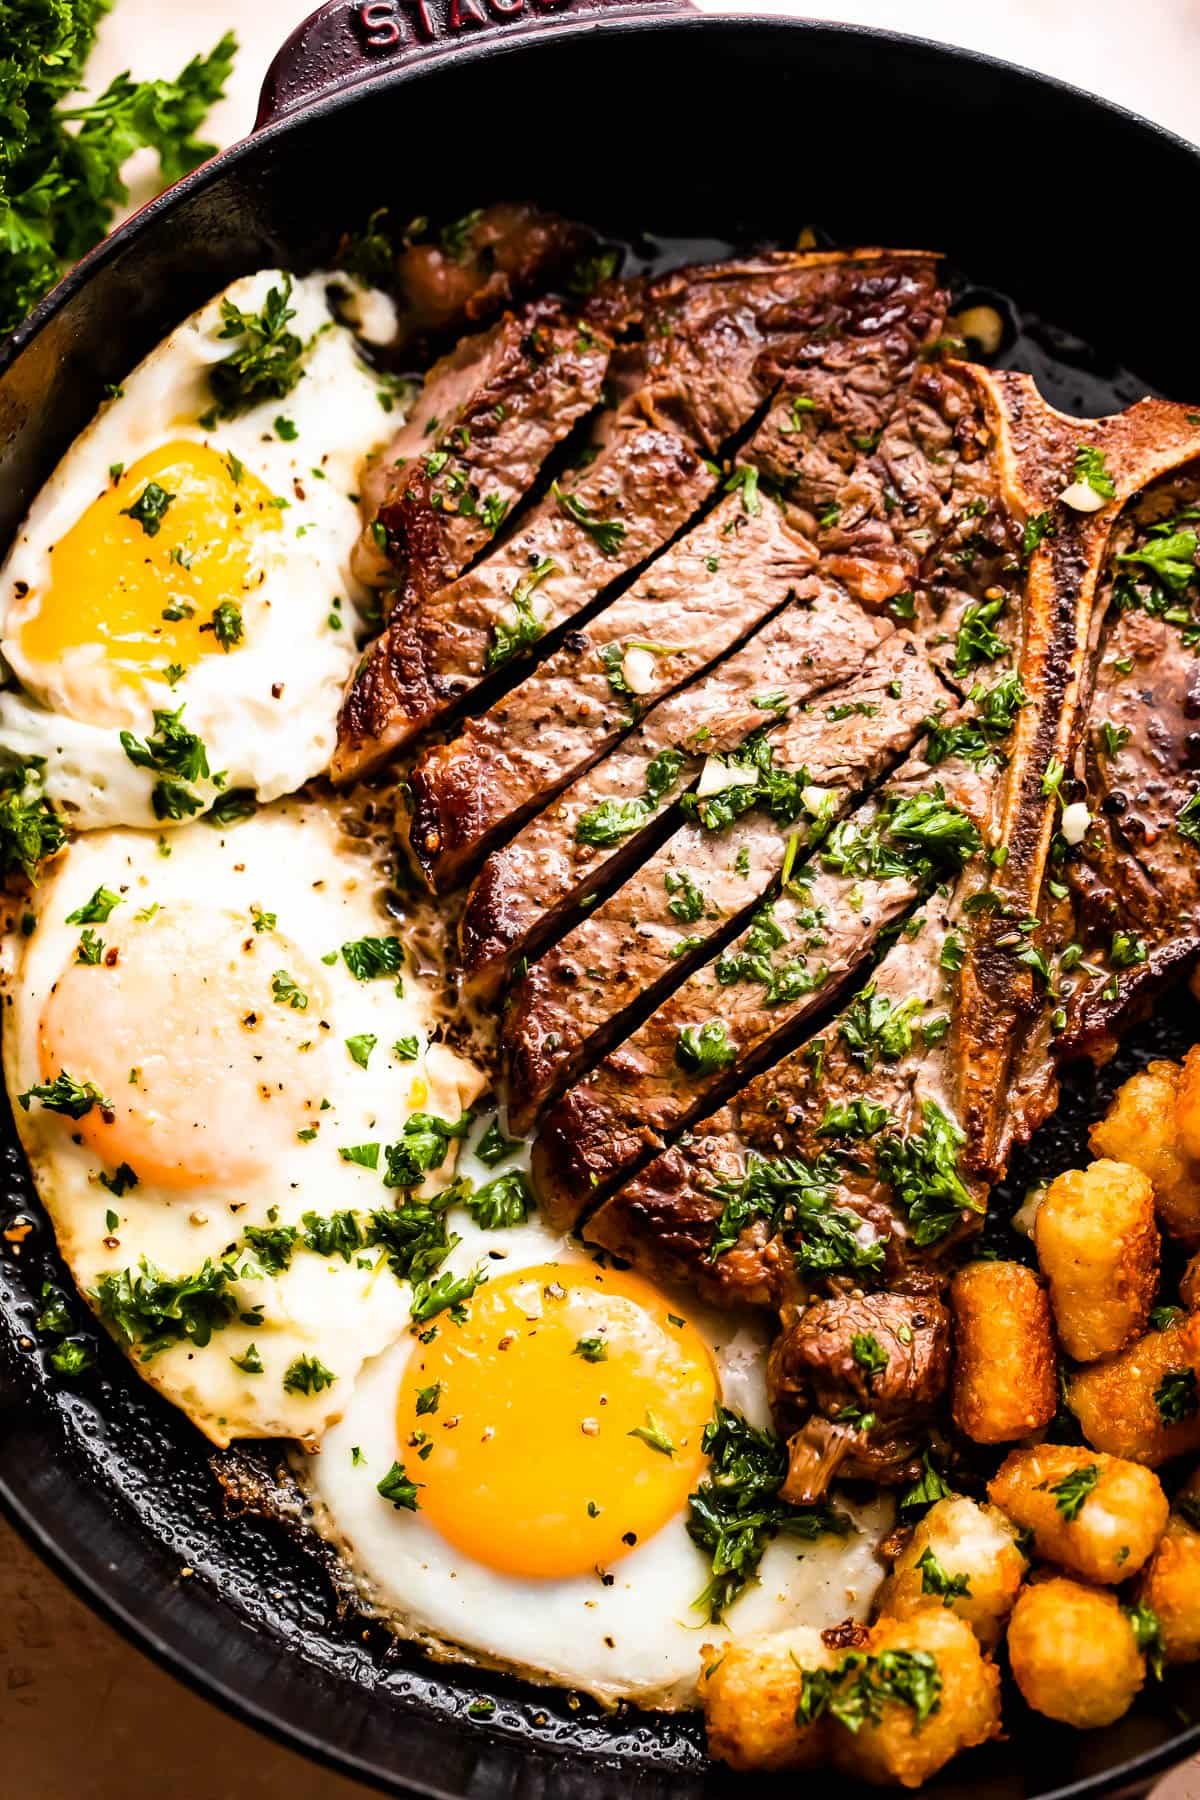 Close-up shot of a skillet with t-bone steak cut in slices and served next to three eggs cooked over easy.